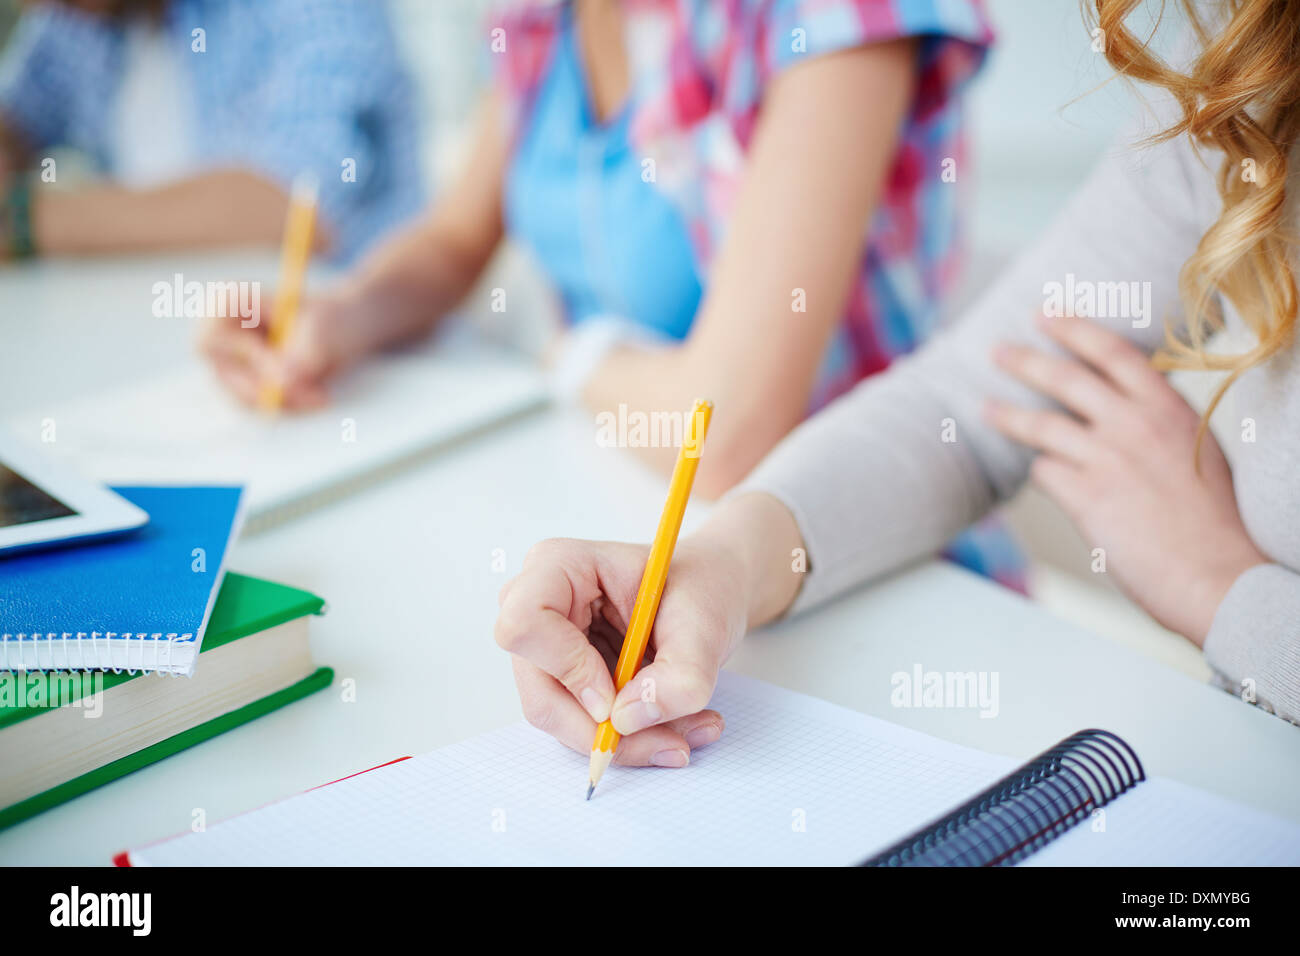 Several groupmates carrying out written task or writing lecture Stock Photo